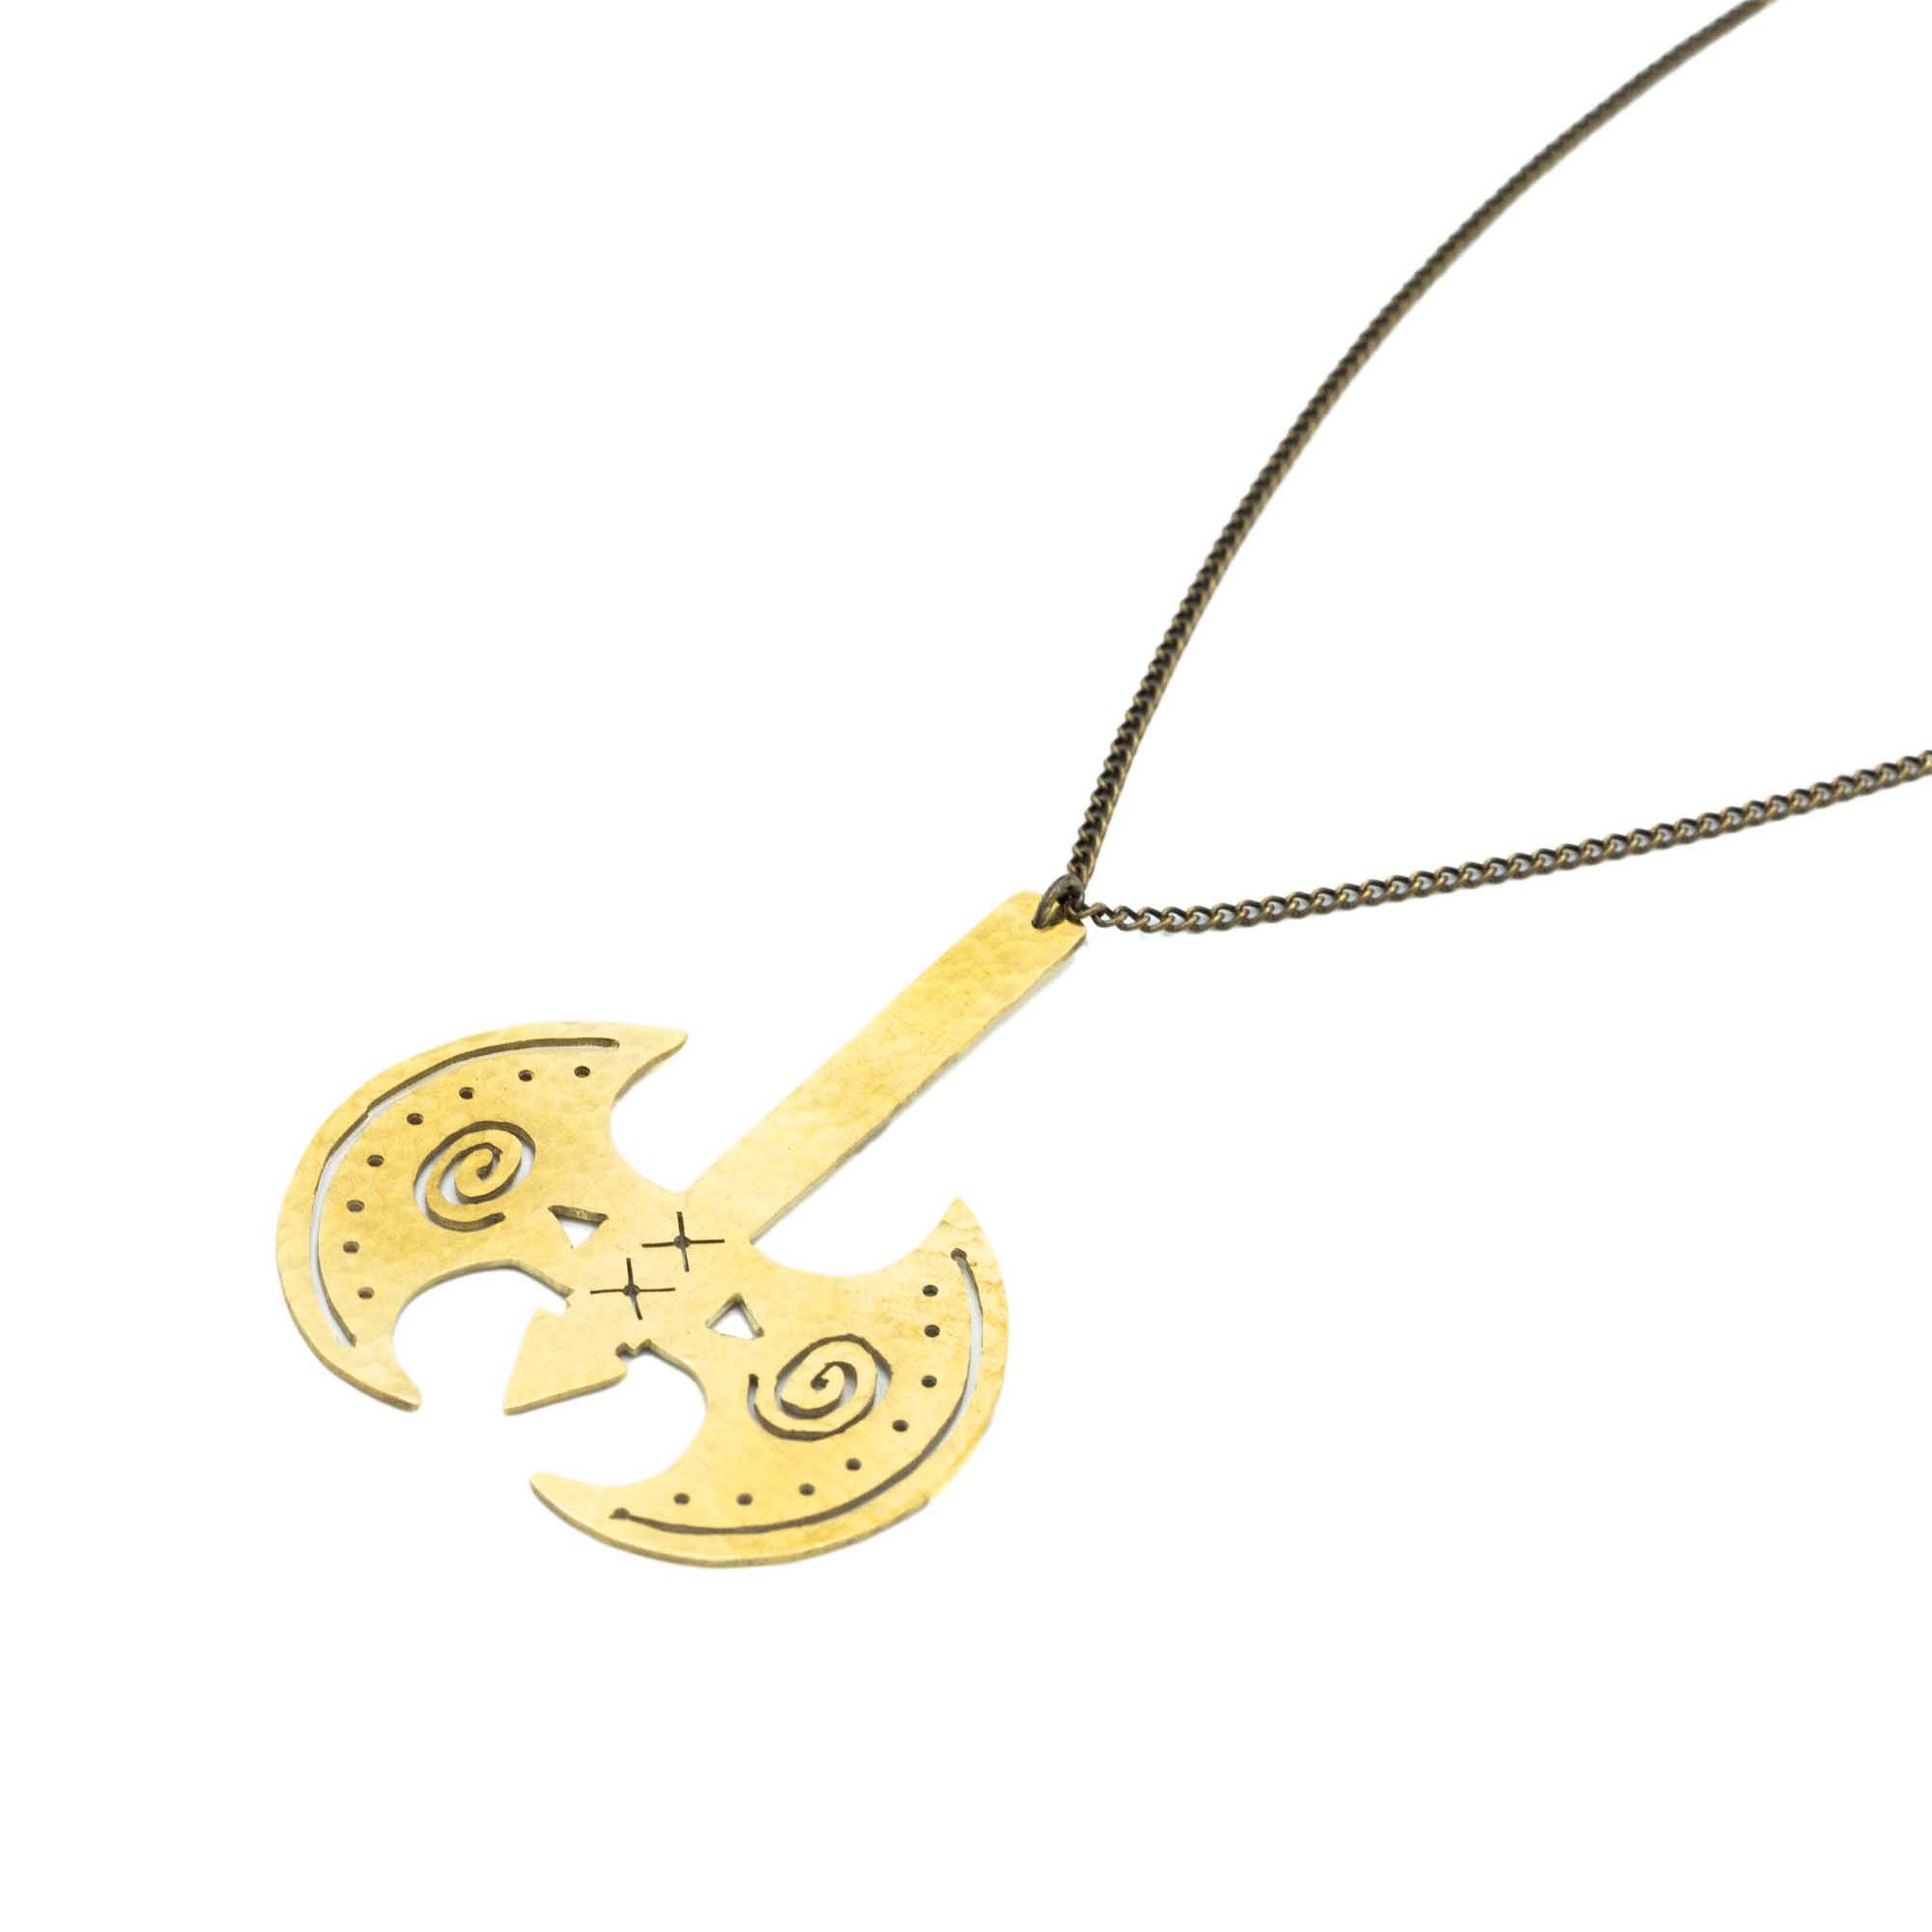 Gold Labrys pendant necklace against a white backdrop.